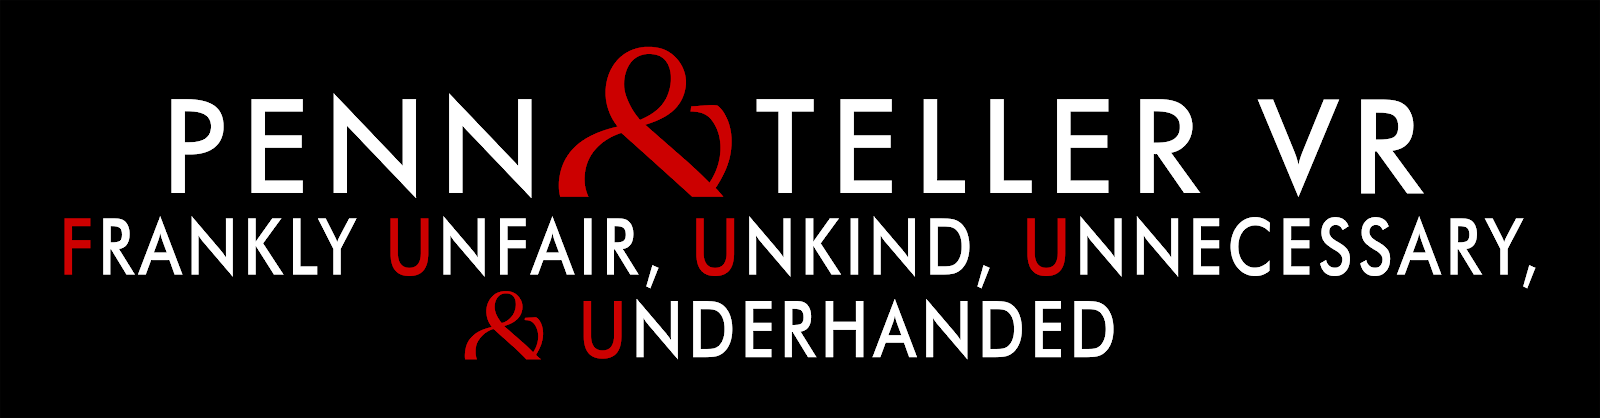 and Prank Your in Penn & Teller VR: Unfair, Unkind, Unnecessary & Underhanded, Available Now - TriplePoint Newsroom